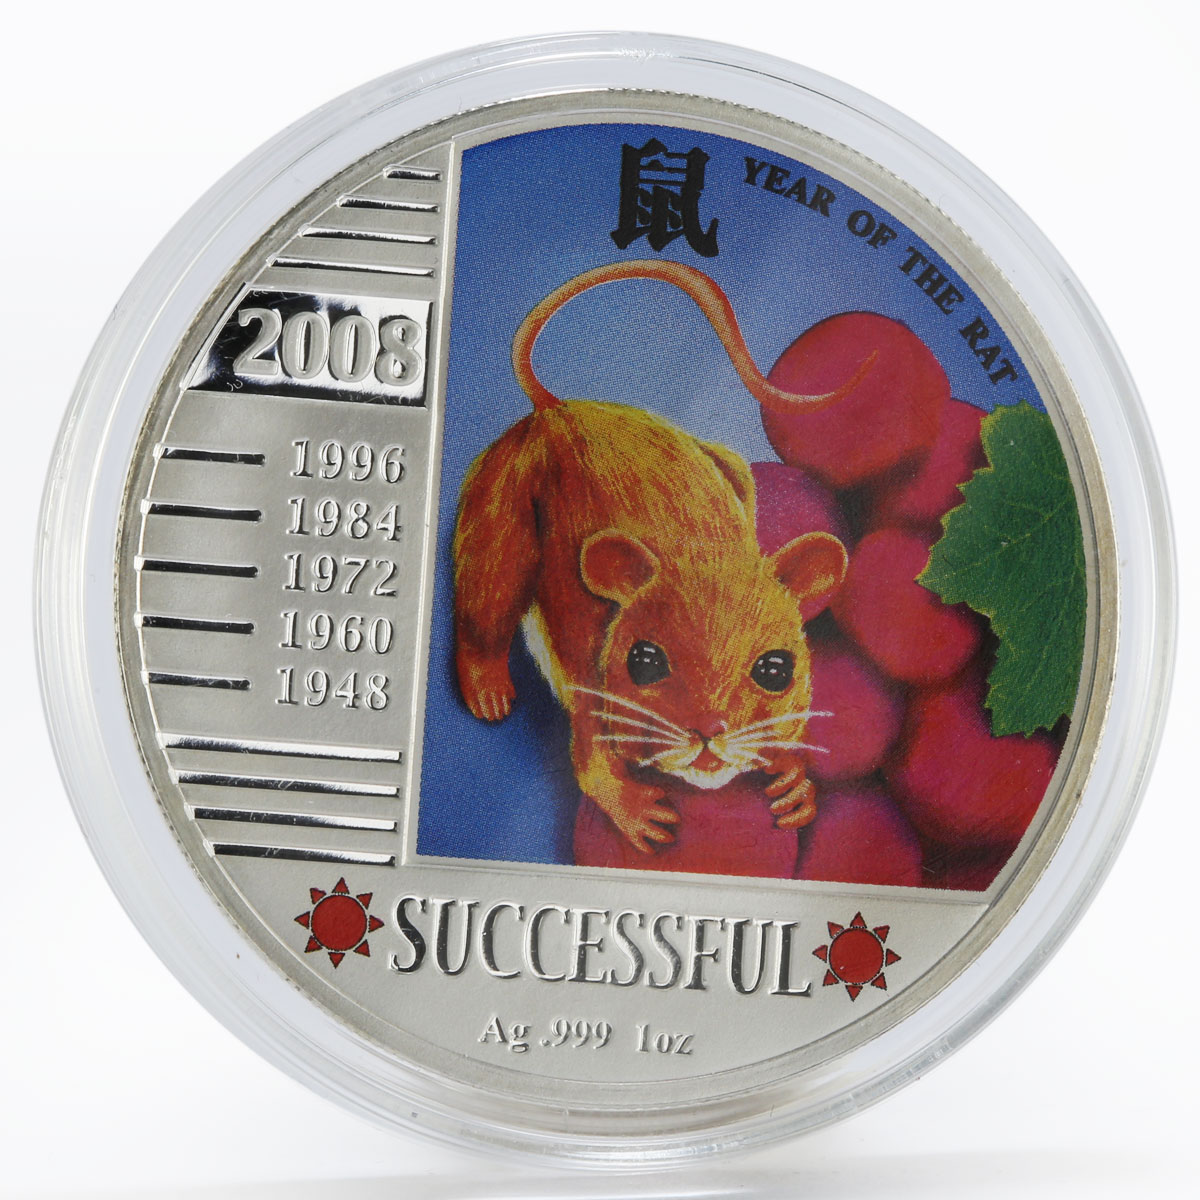 Niue 1 dollar Year of the Rat Successful colored silver proof coin 2008